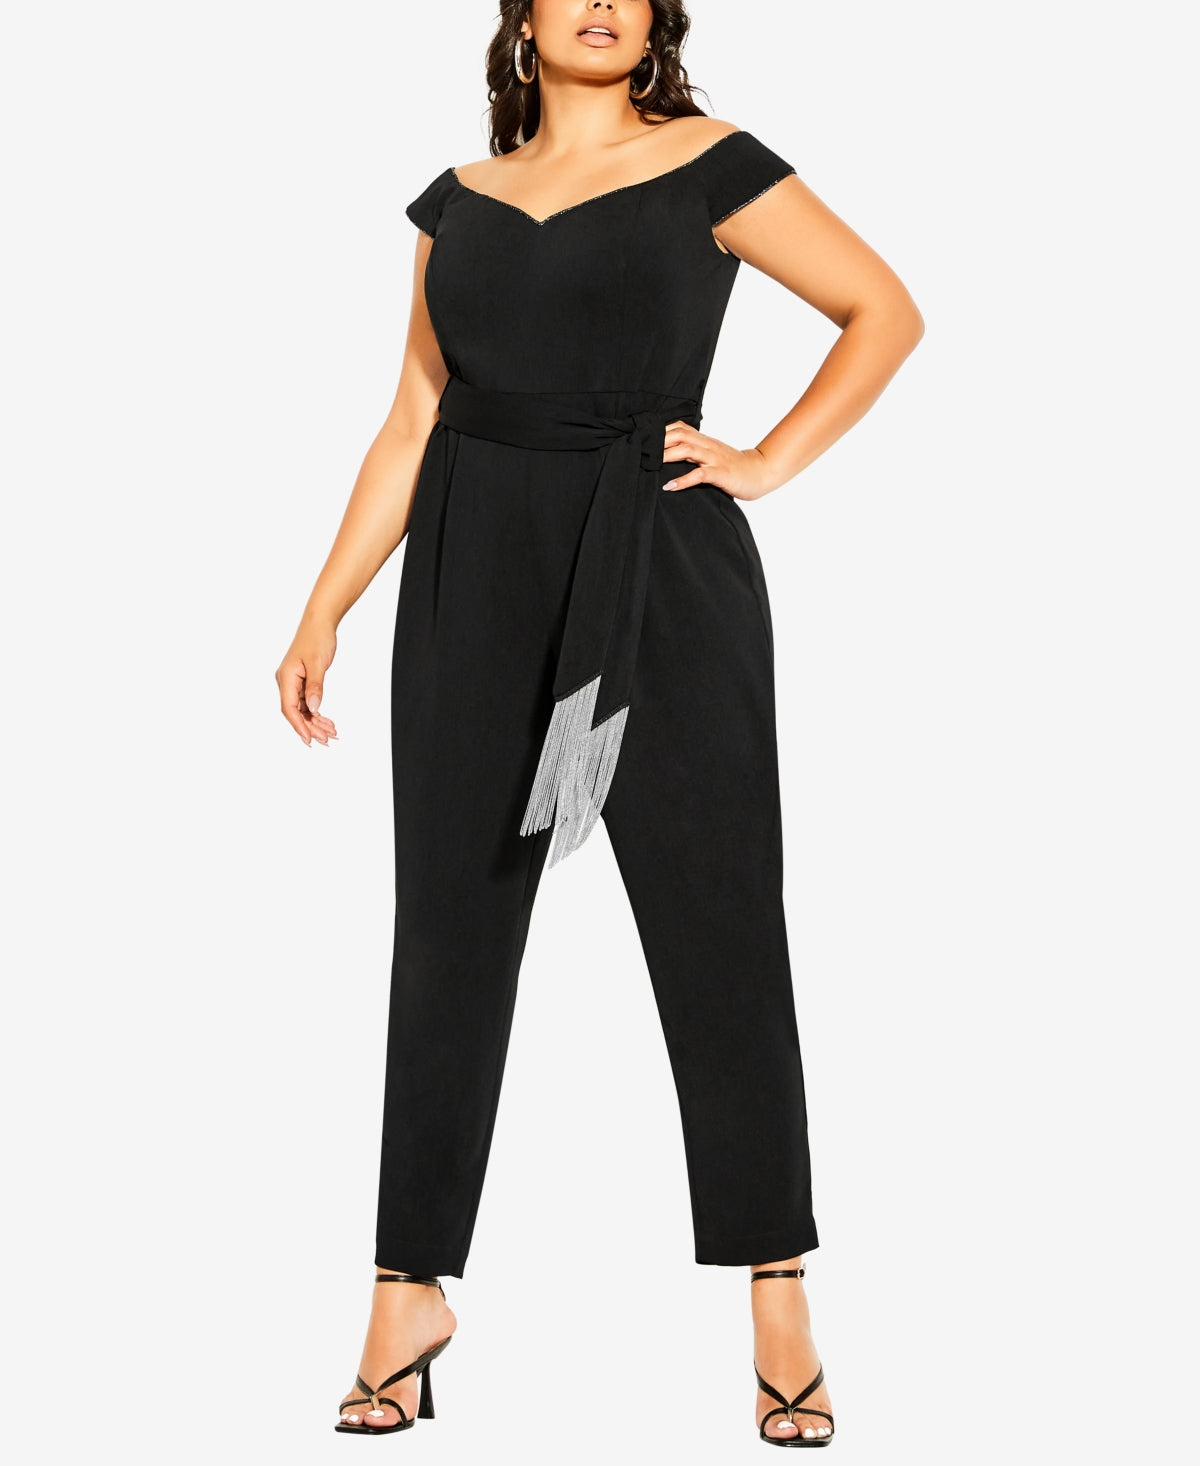 City Chic Mayhem Off the Shoulder Jumpsuit in Black at Nordstrom, Size X-Small Jumpsuits & Rompers by City Chic | Brands Overstock